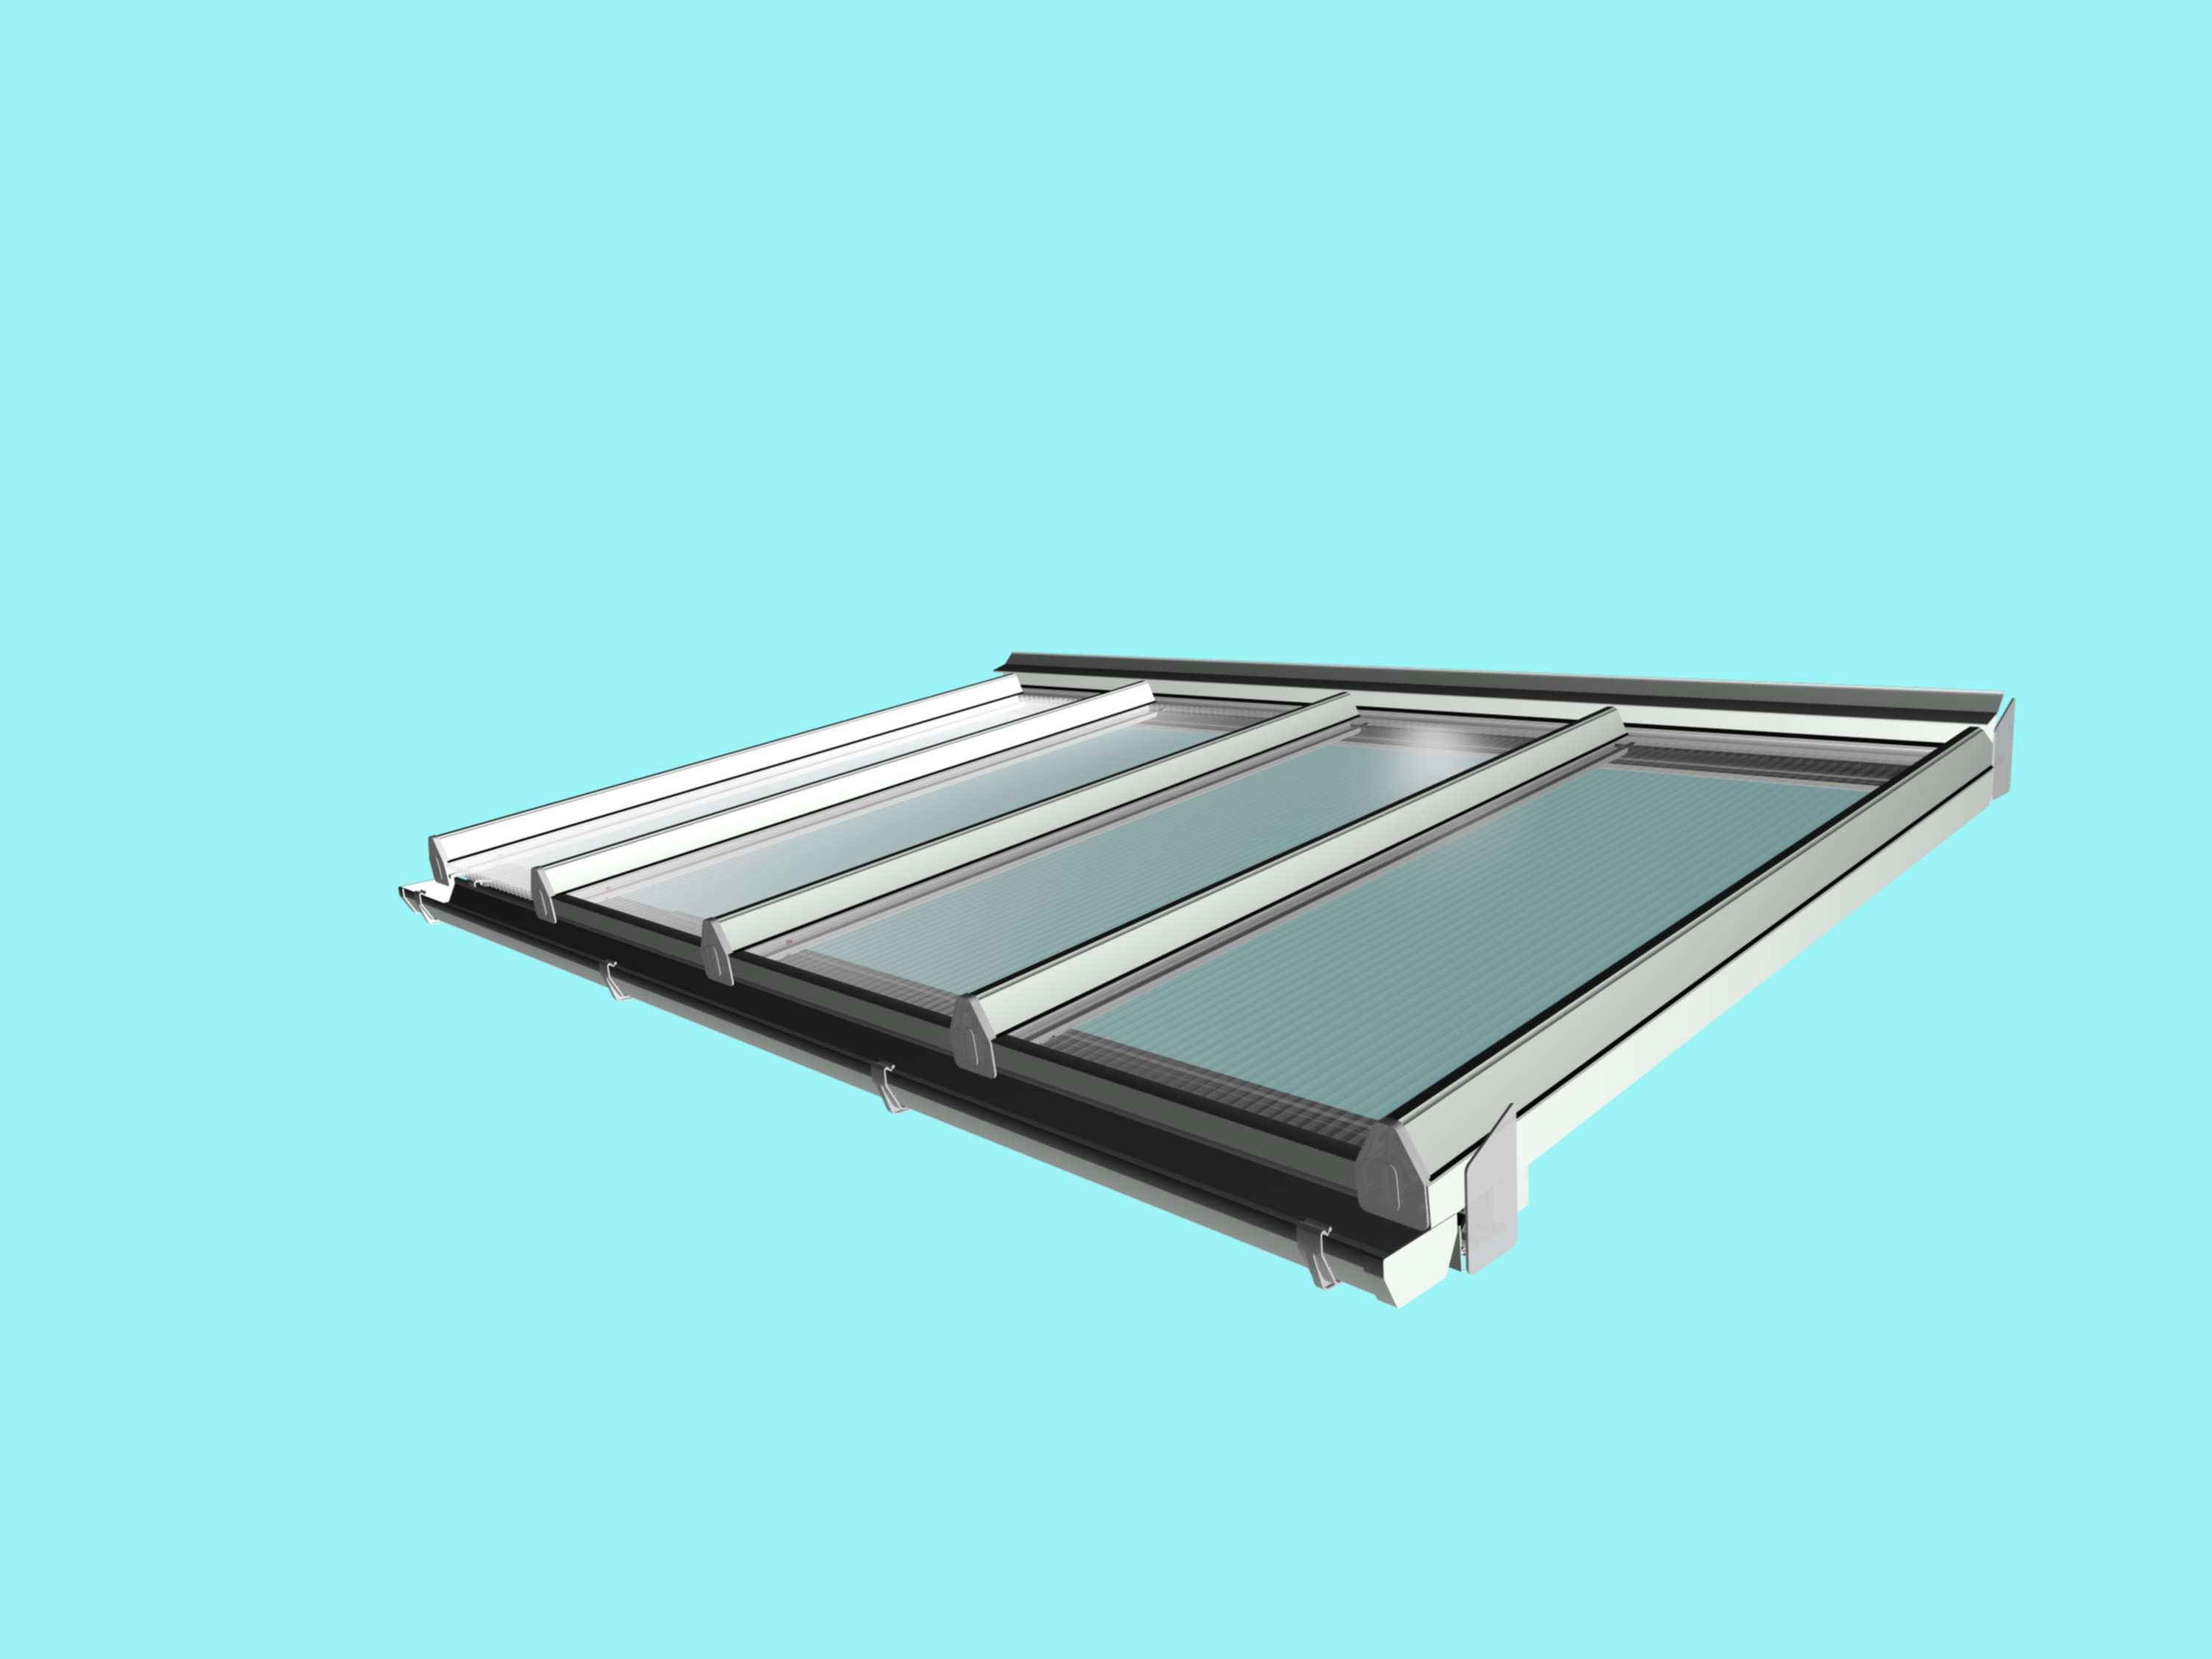 Self-Supporting DIY Conservatory Roof Kit for 25mm polycarbonate, 3.0m wide x 3.0m Projection from Omega Build